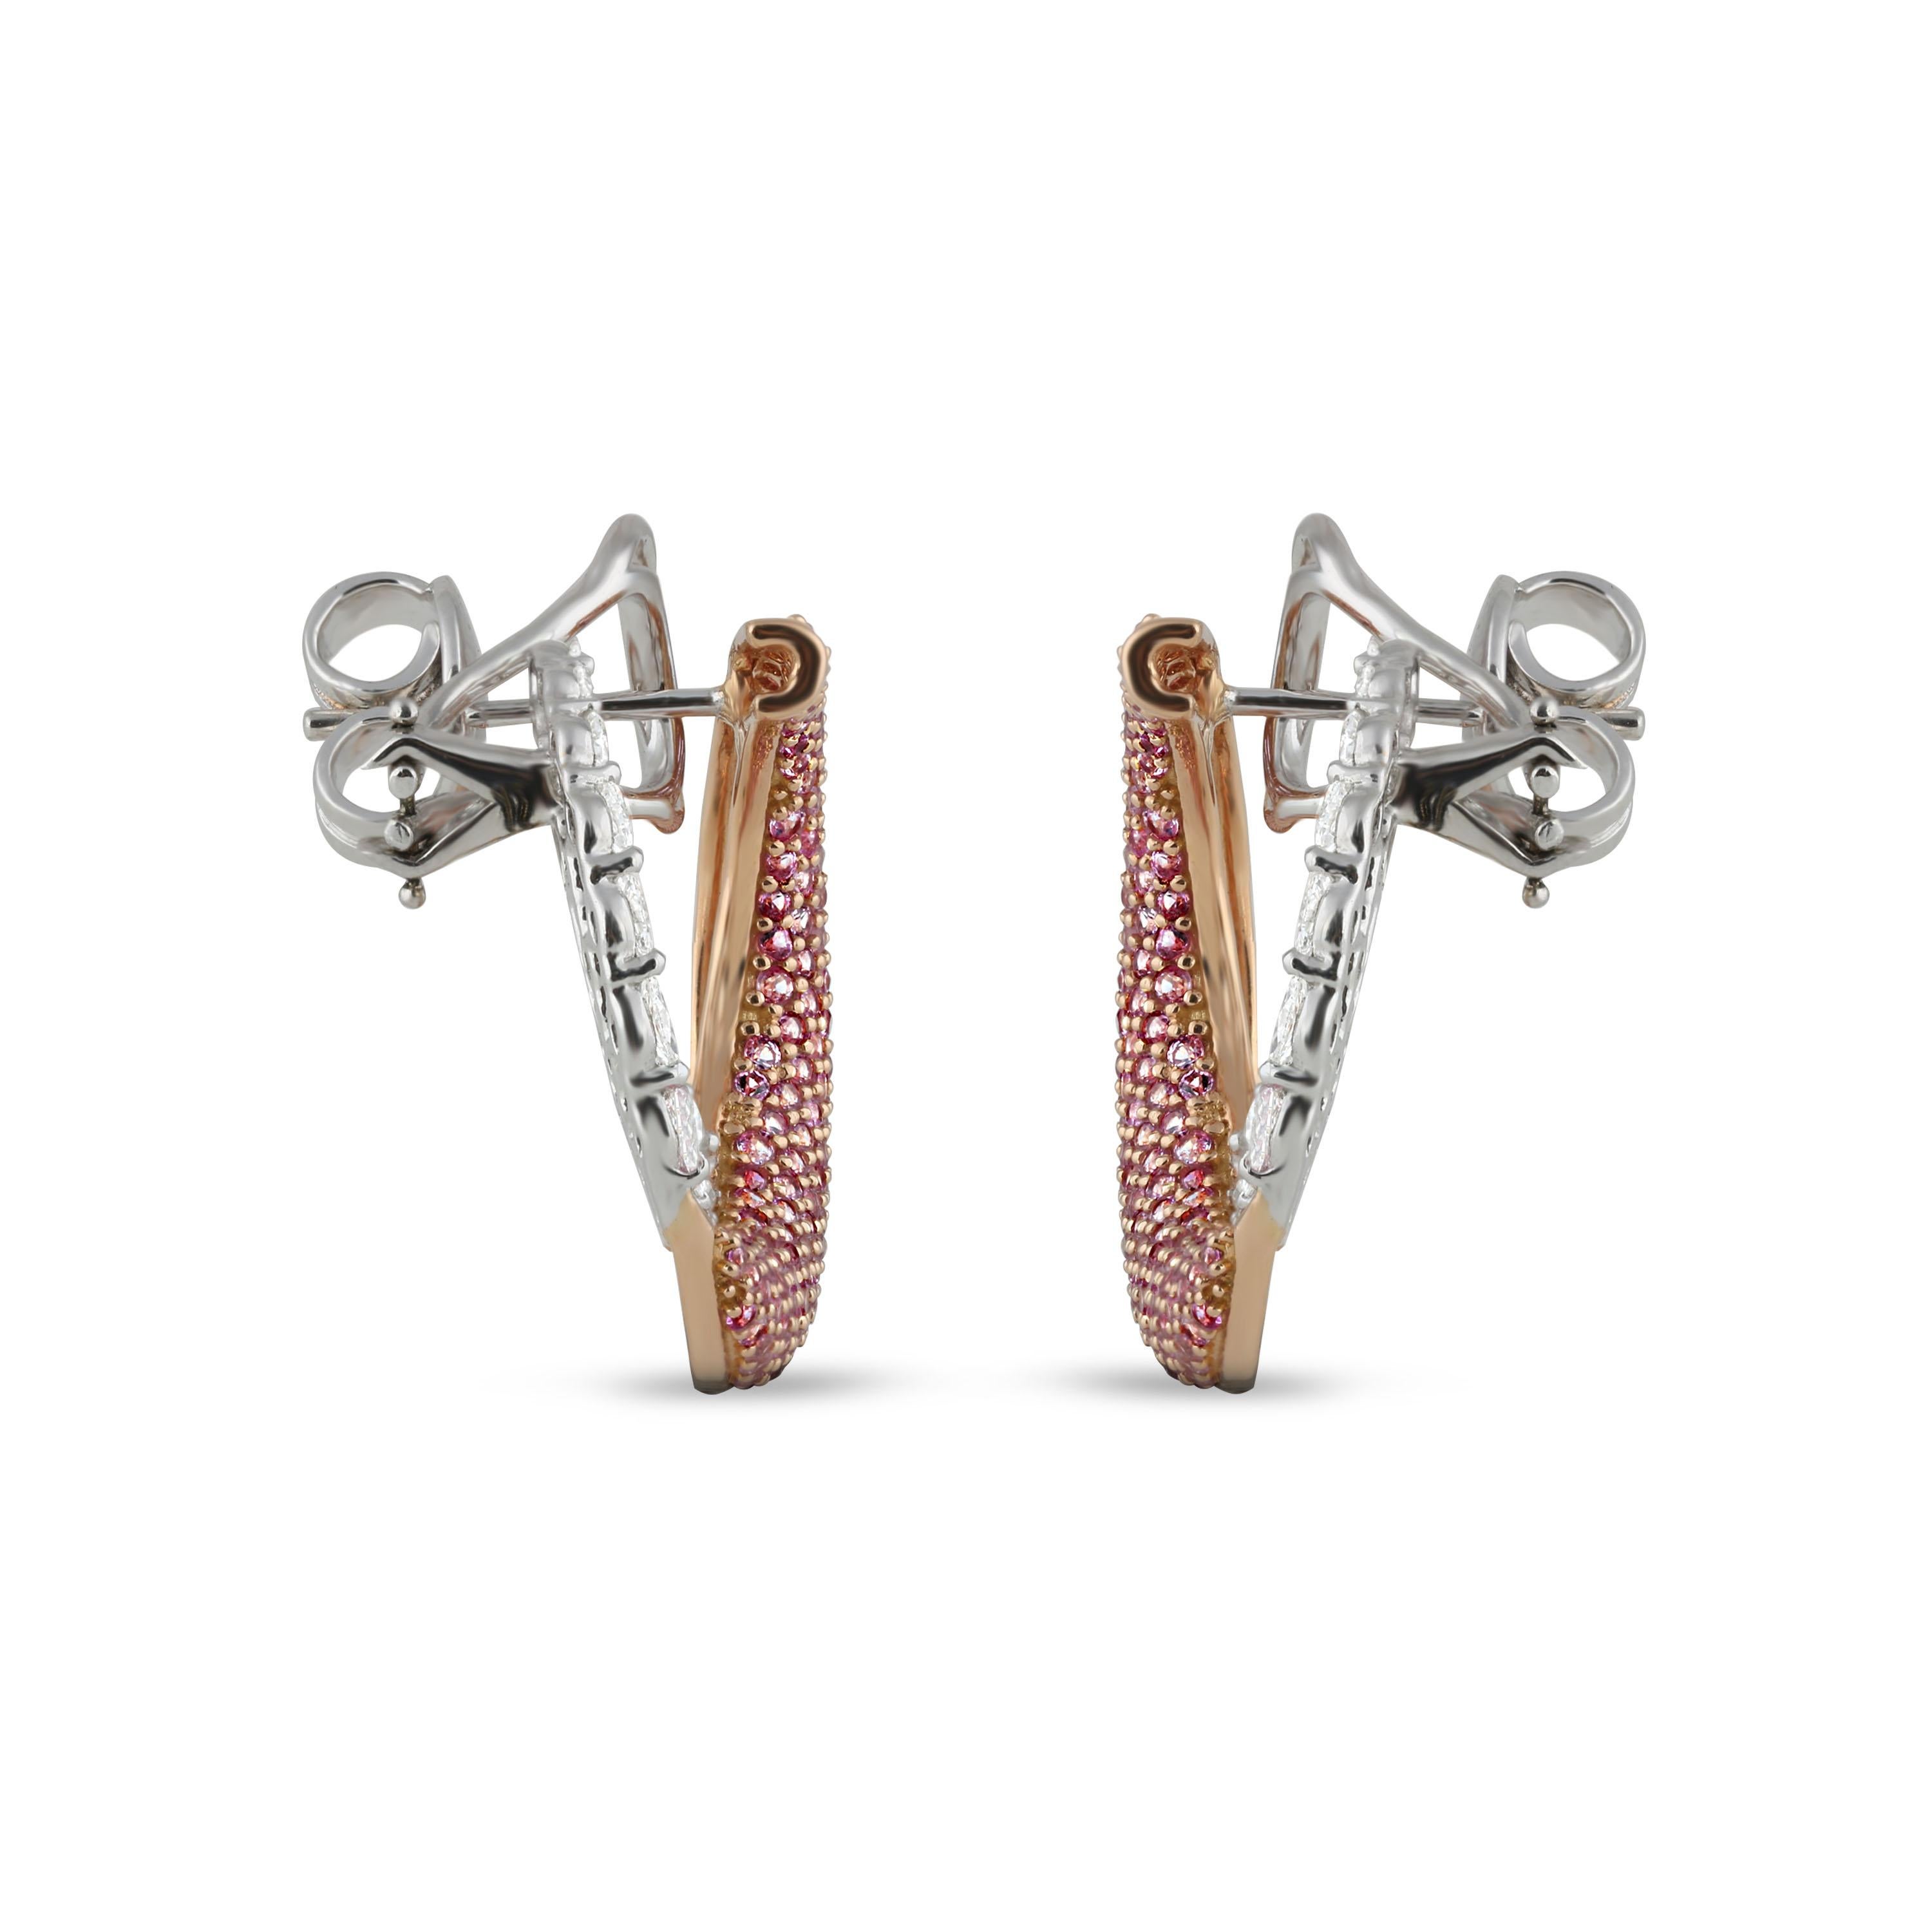 Contemporary Studio Rêves Diamond Marquise and Pink Sapphire Earrings in 18 Karat Gold